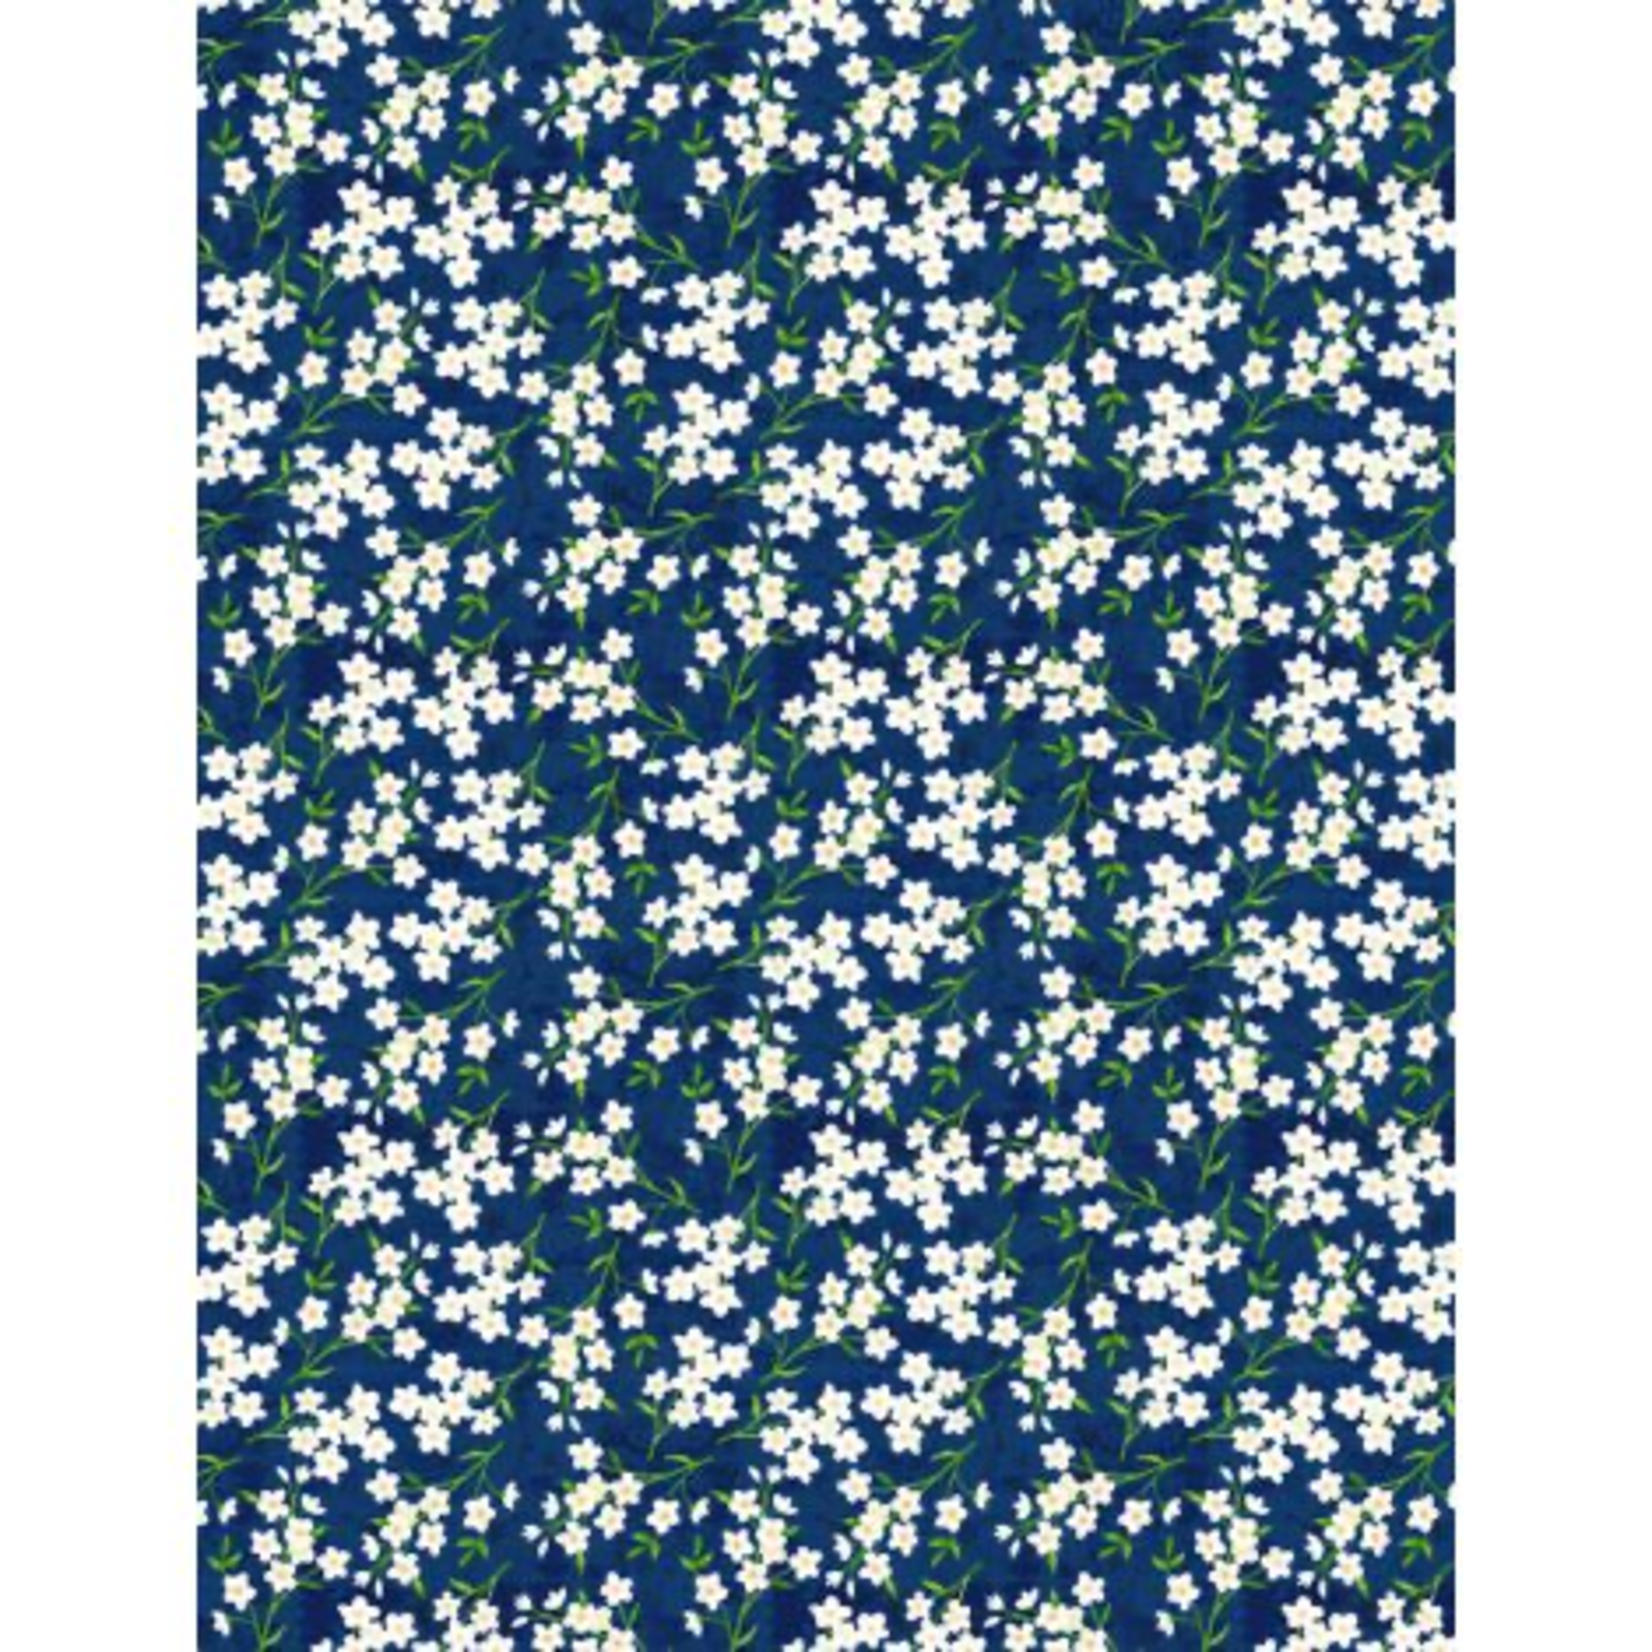 Wilmington Prints Madison Navy with white flowers, /cm or $20/m